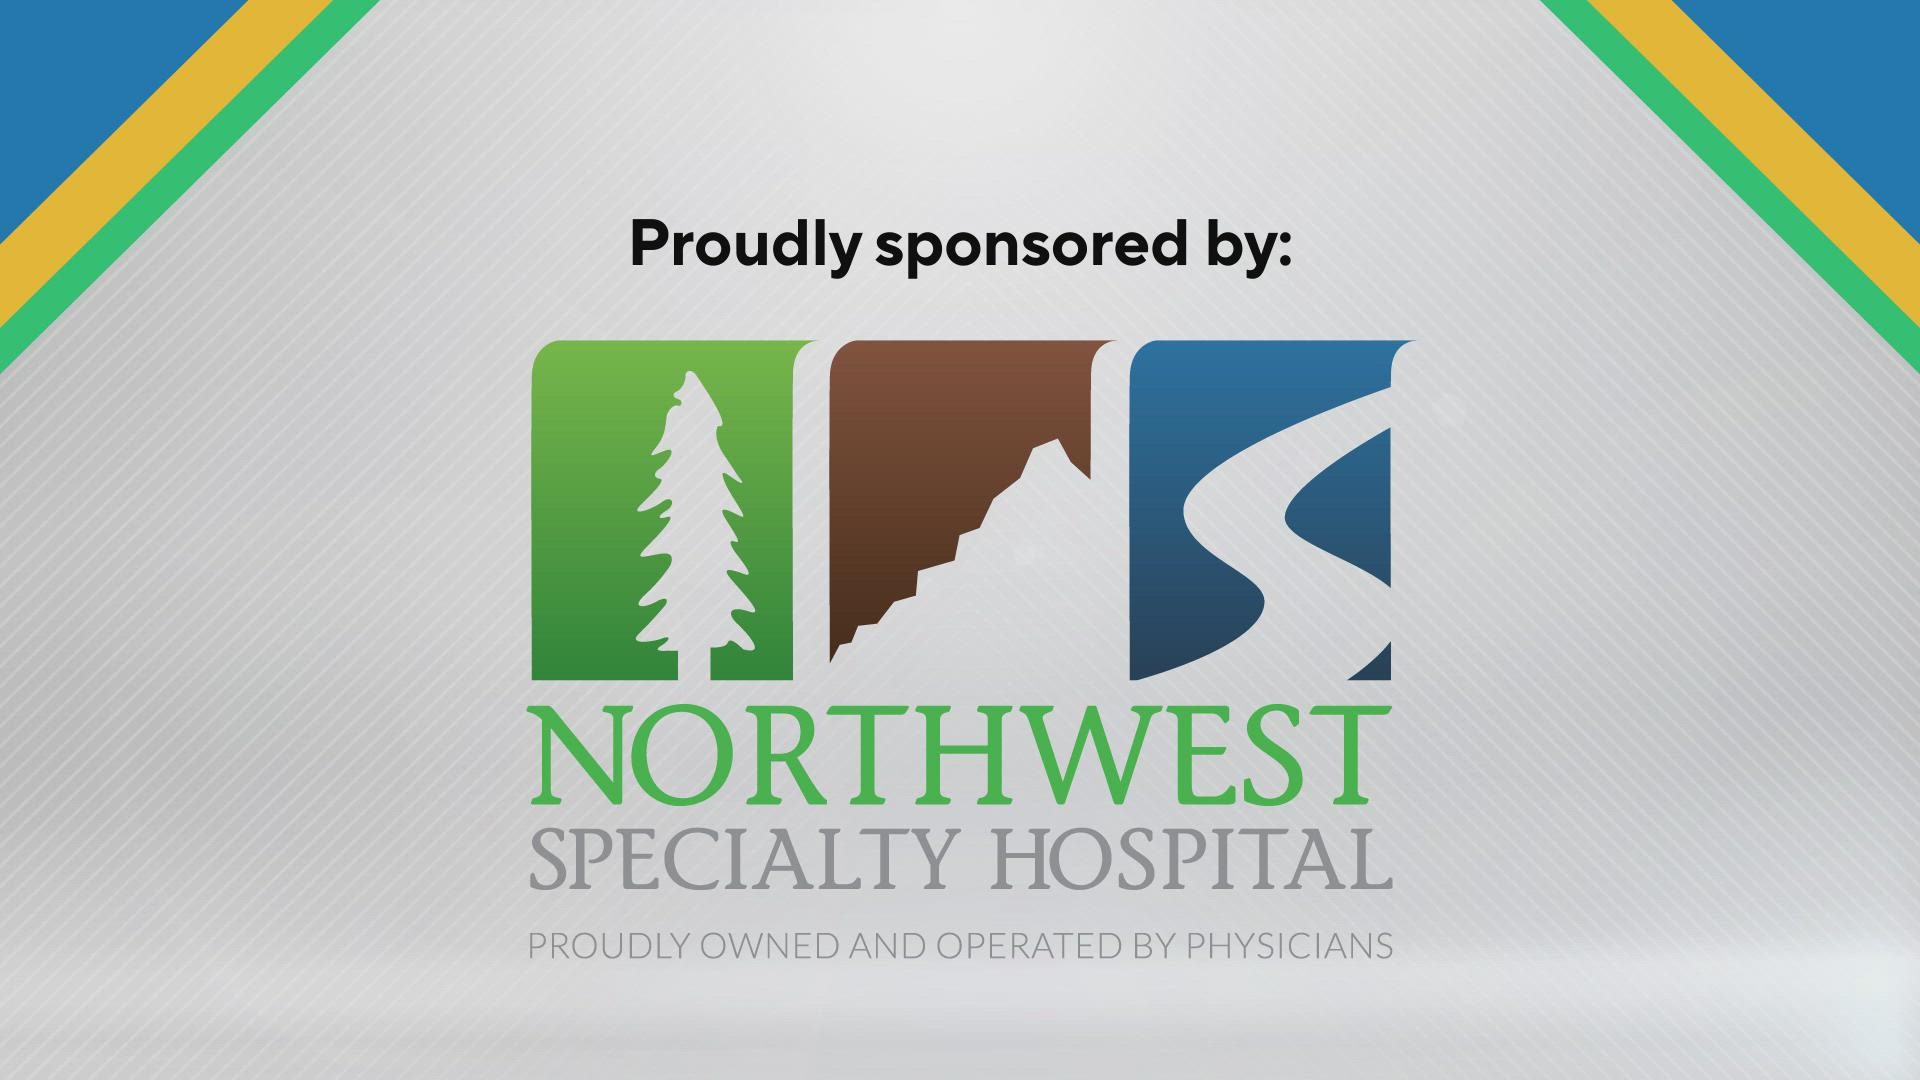 Northwest Specialty Hospital has a strong commitment to enriching and supporting the community.